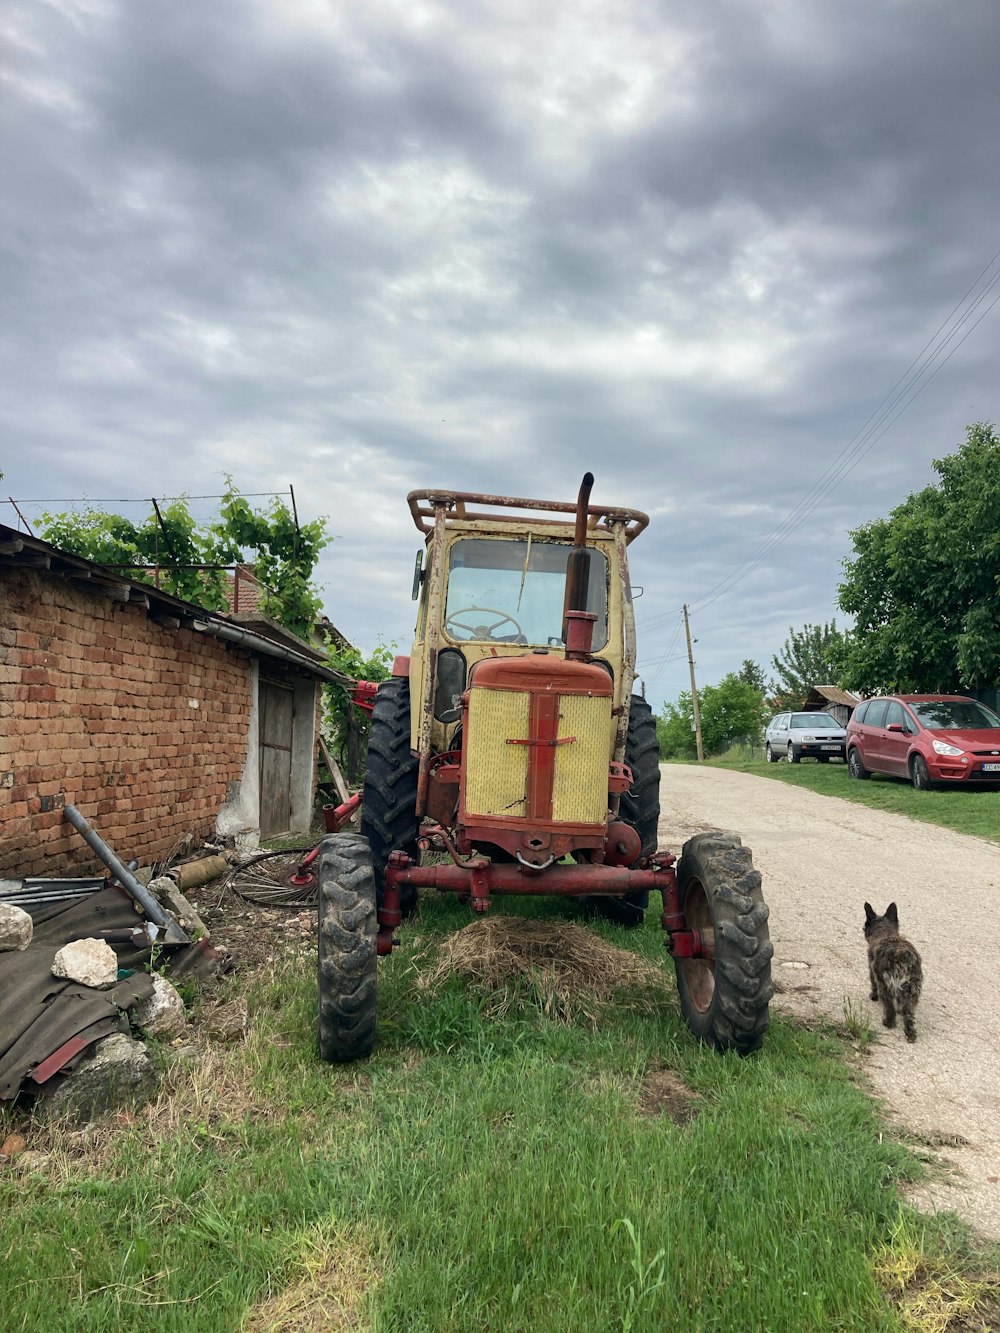 a cat standing next to a tractor on a dirt road